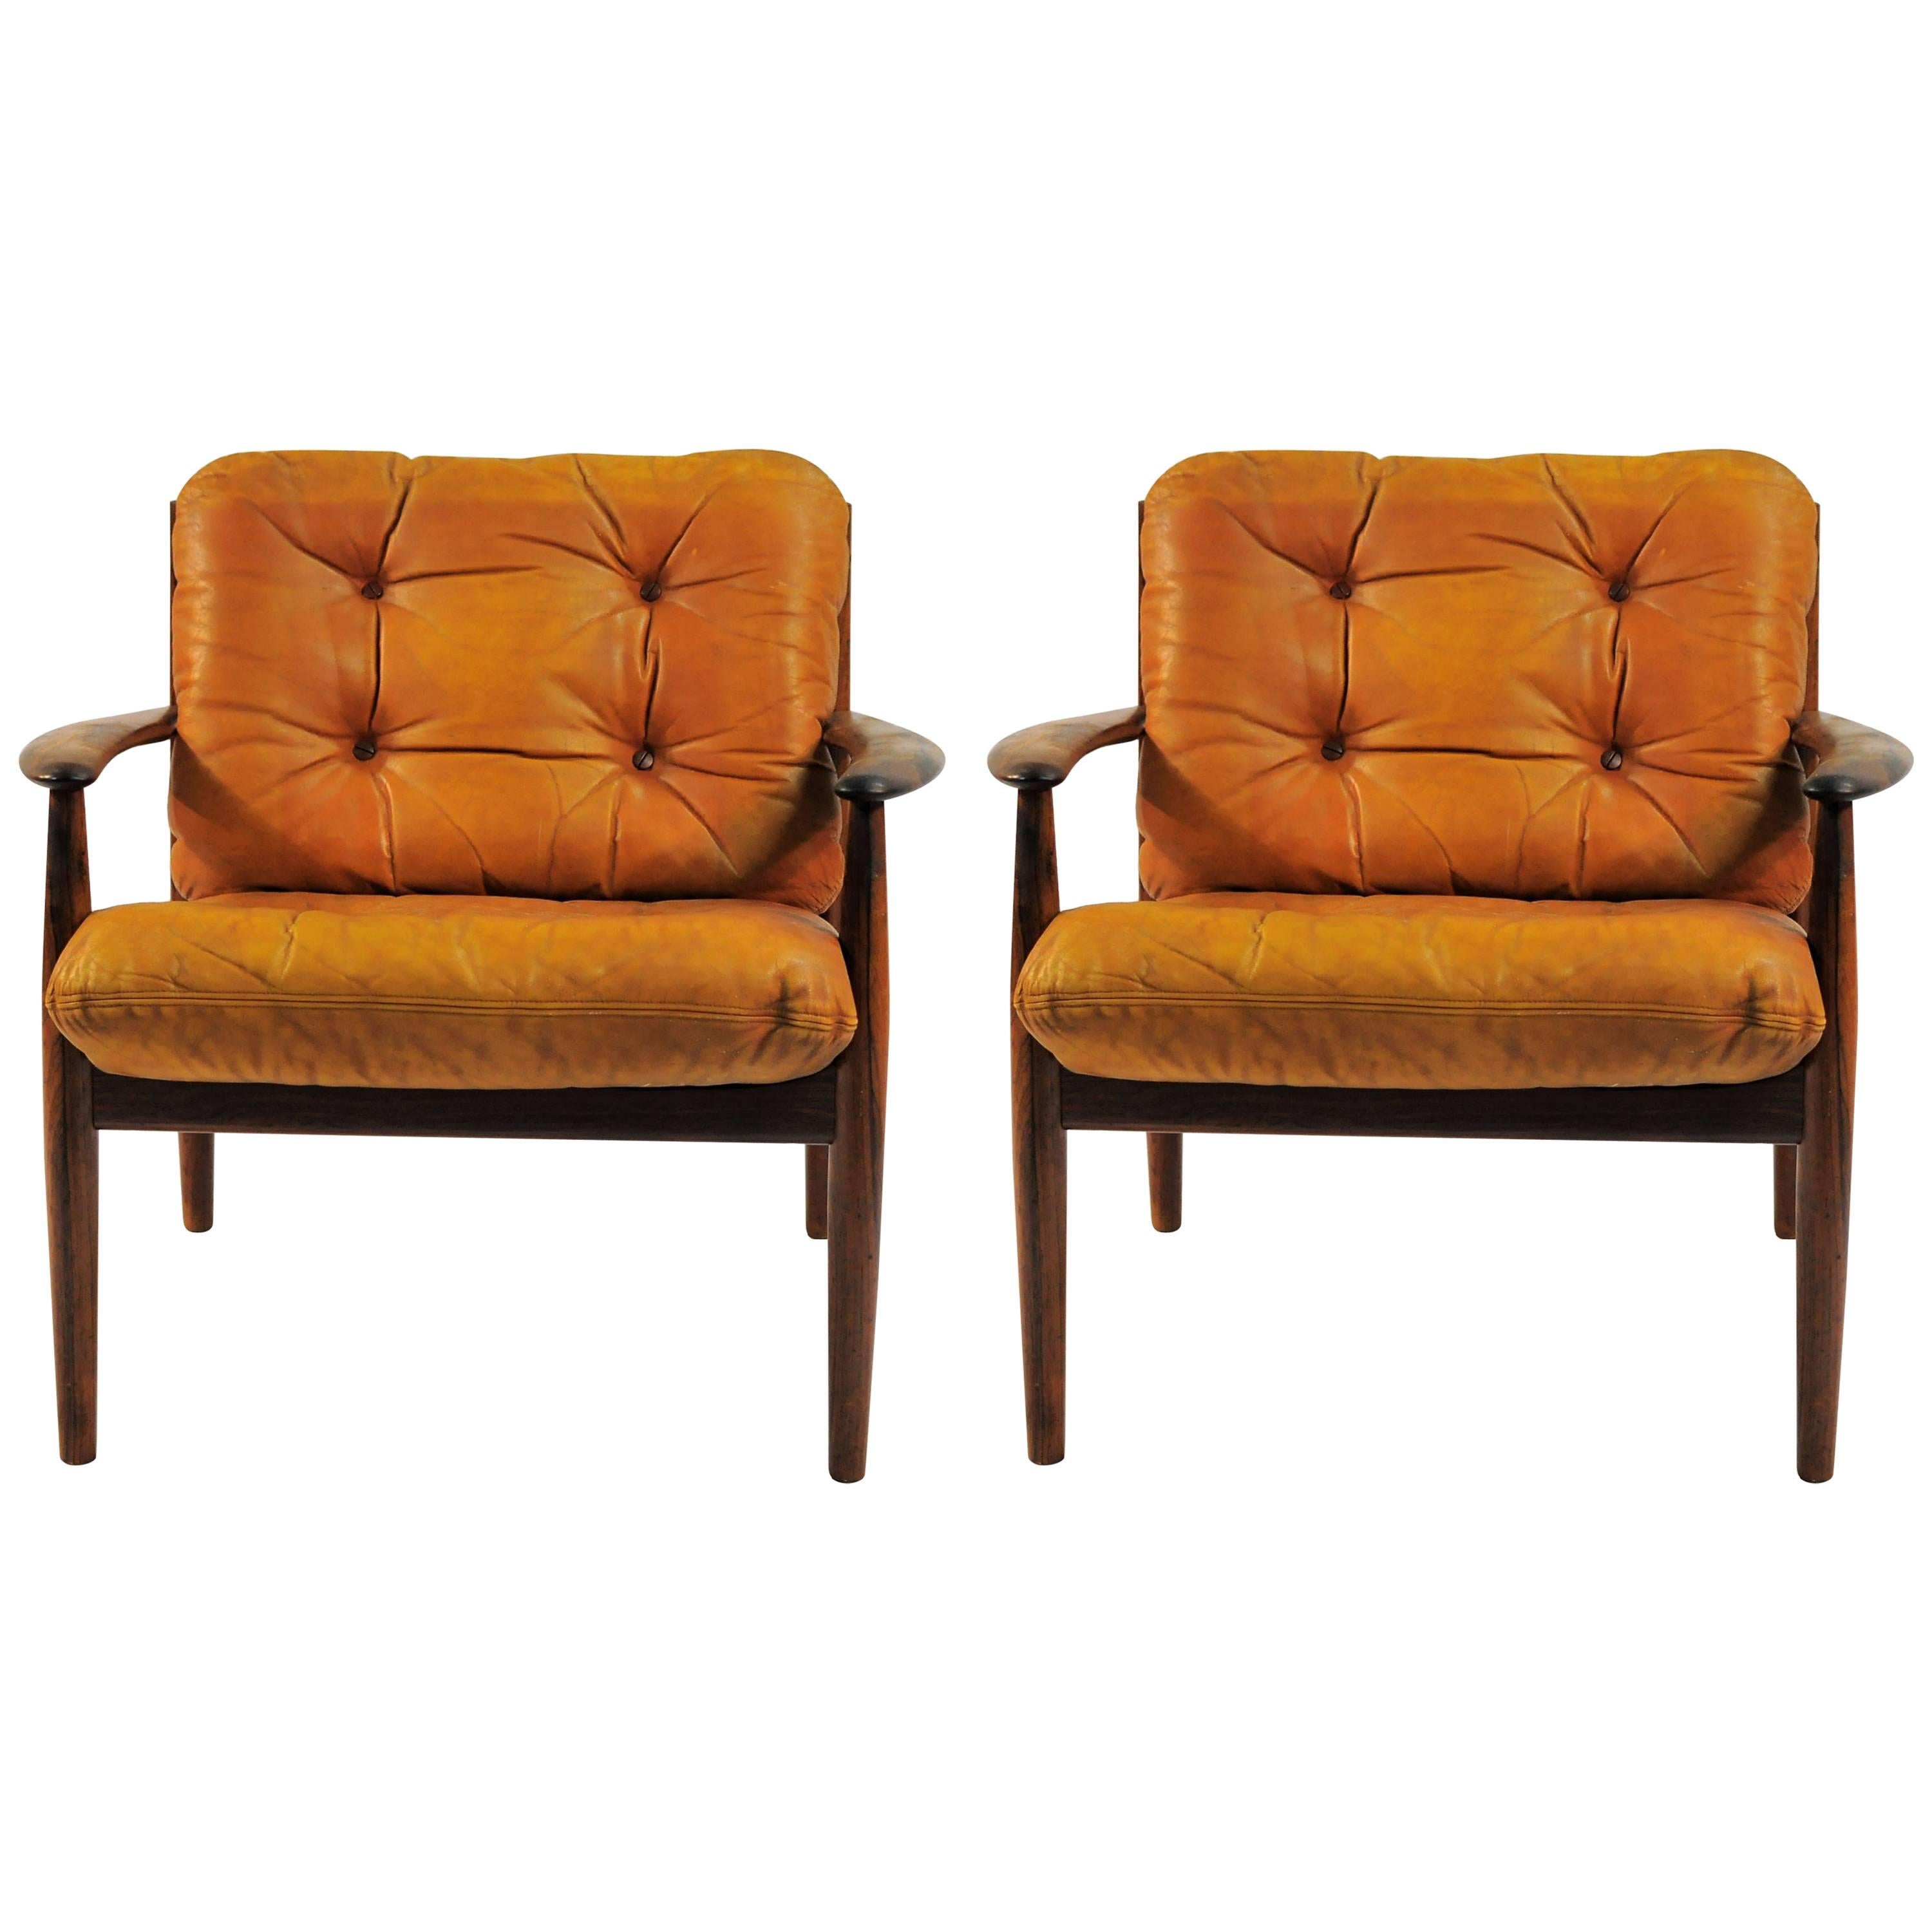 1960s Grete Jalk Lounge Chairs in Rosewood and Original Brown Leather Cushions